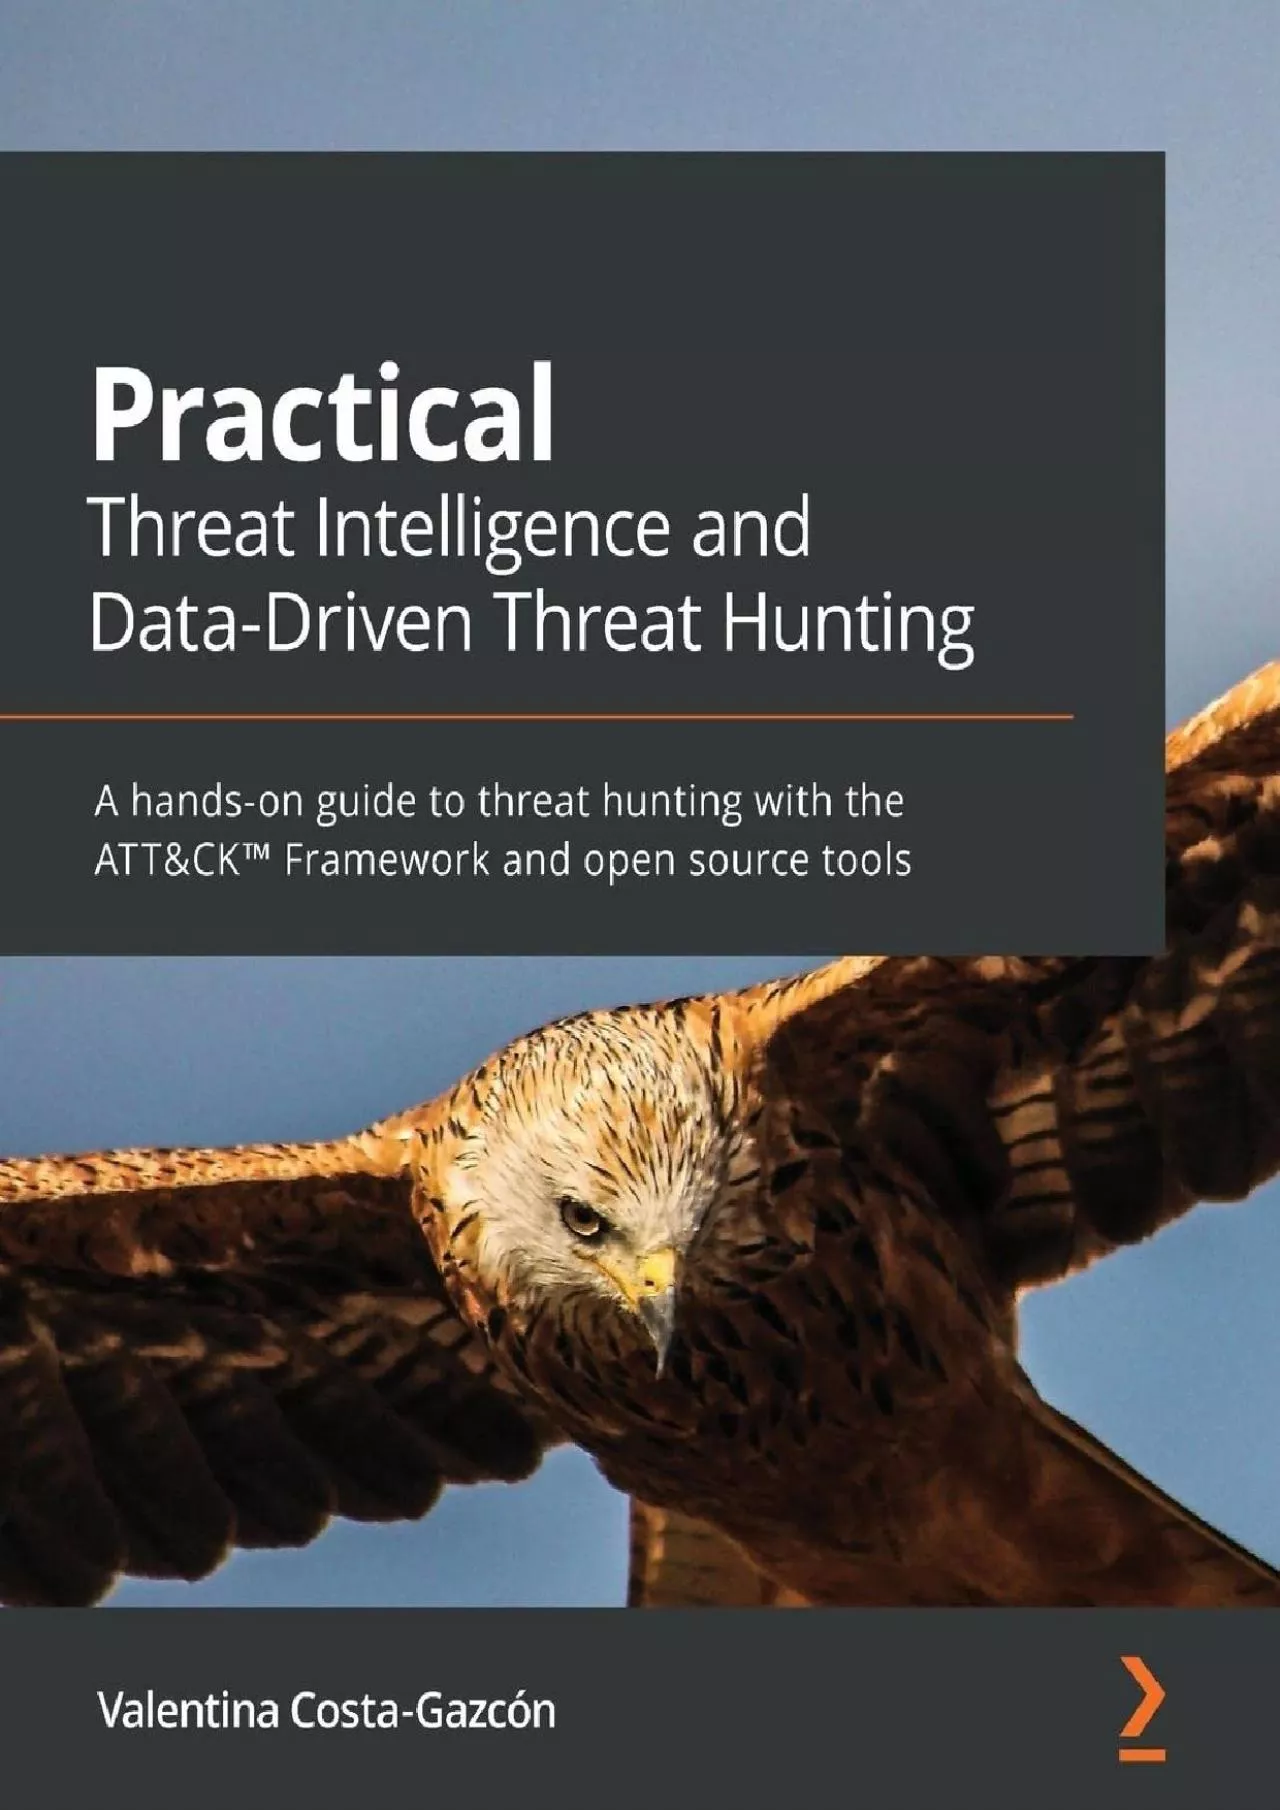 [DOWLOAD]-Practical Threat Intelligence and Data-Driven Threat Hunting: A hands-on guide